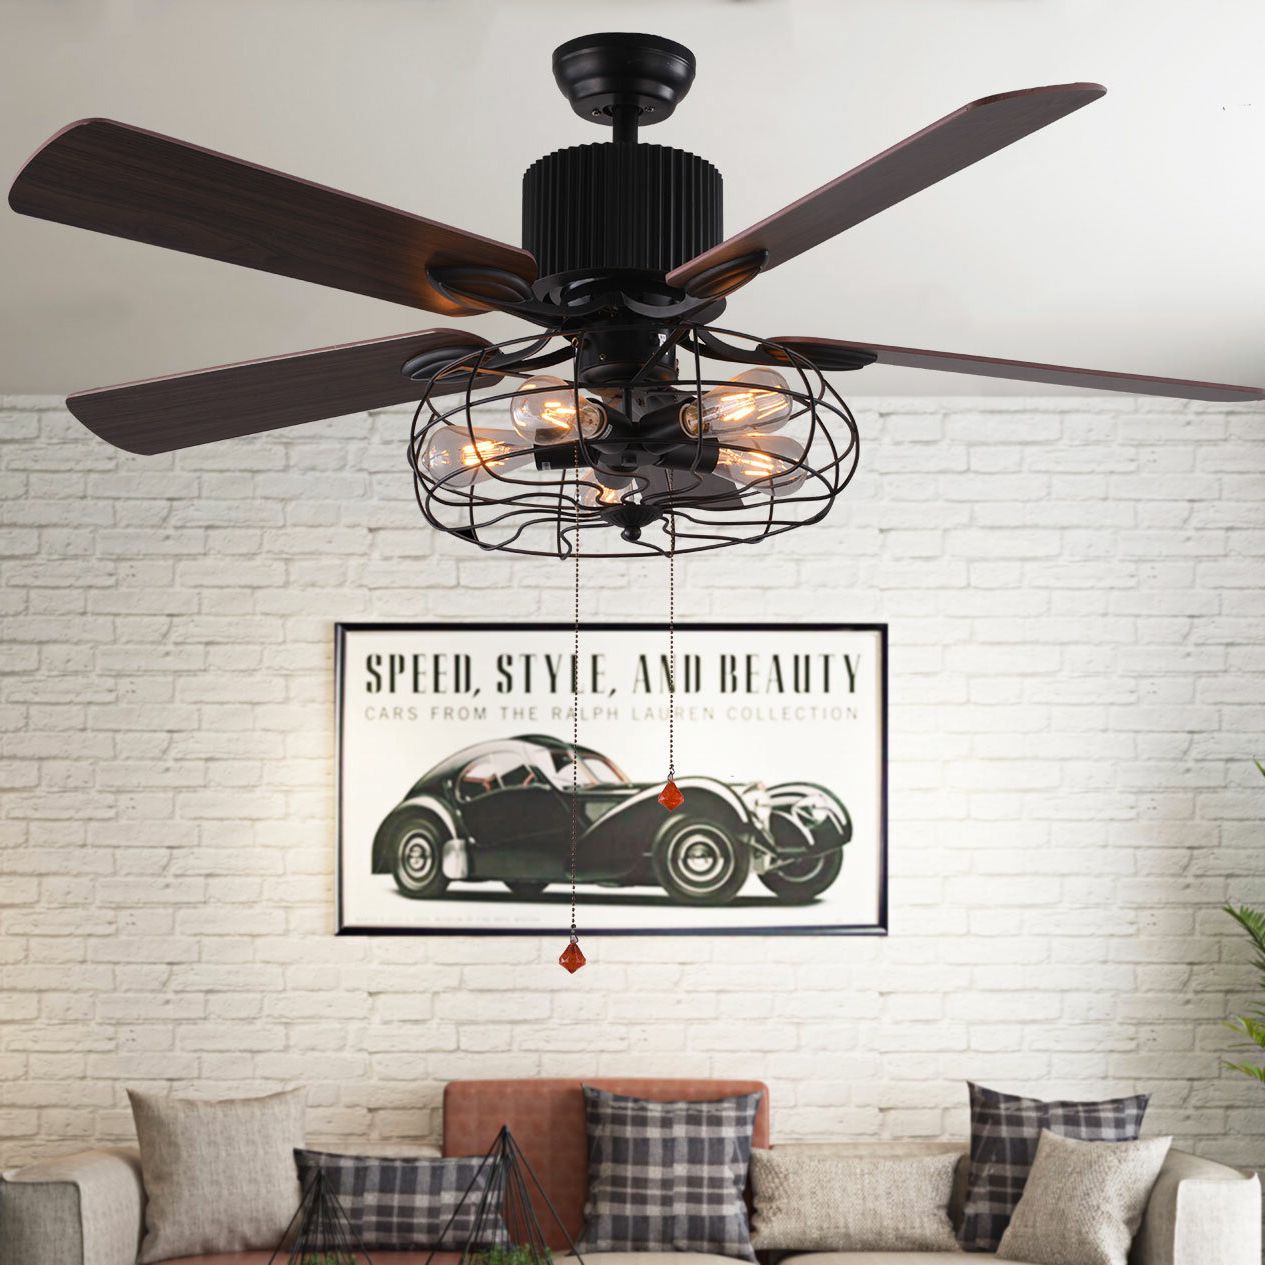 Borg 5 Blade Ceiling Fan With Remote Pertaining To Preferred Wilburton 5 Blade Ceiling Fans With Remote (View 6 of 20)